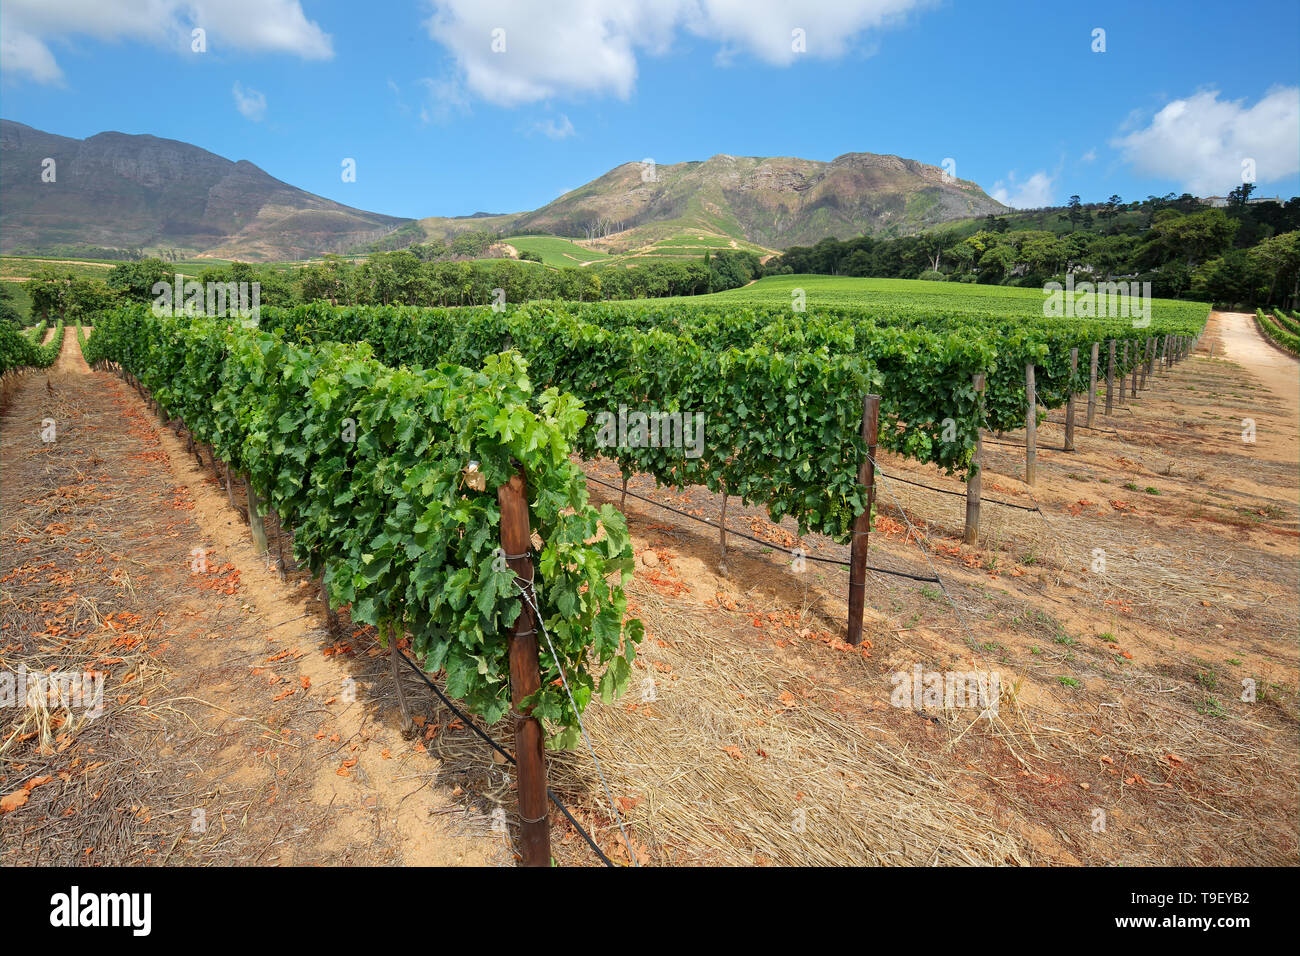 Scenic landscape of a vineyard against a backdrop of mountains, Cape Town, South Africa Stock Photo